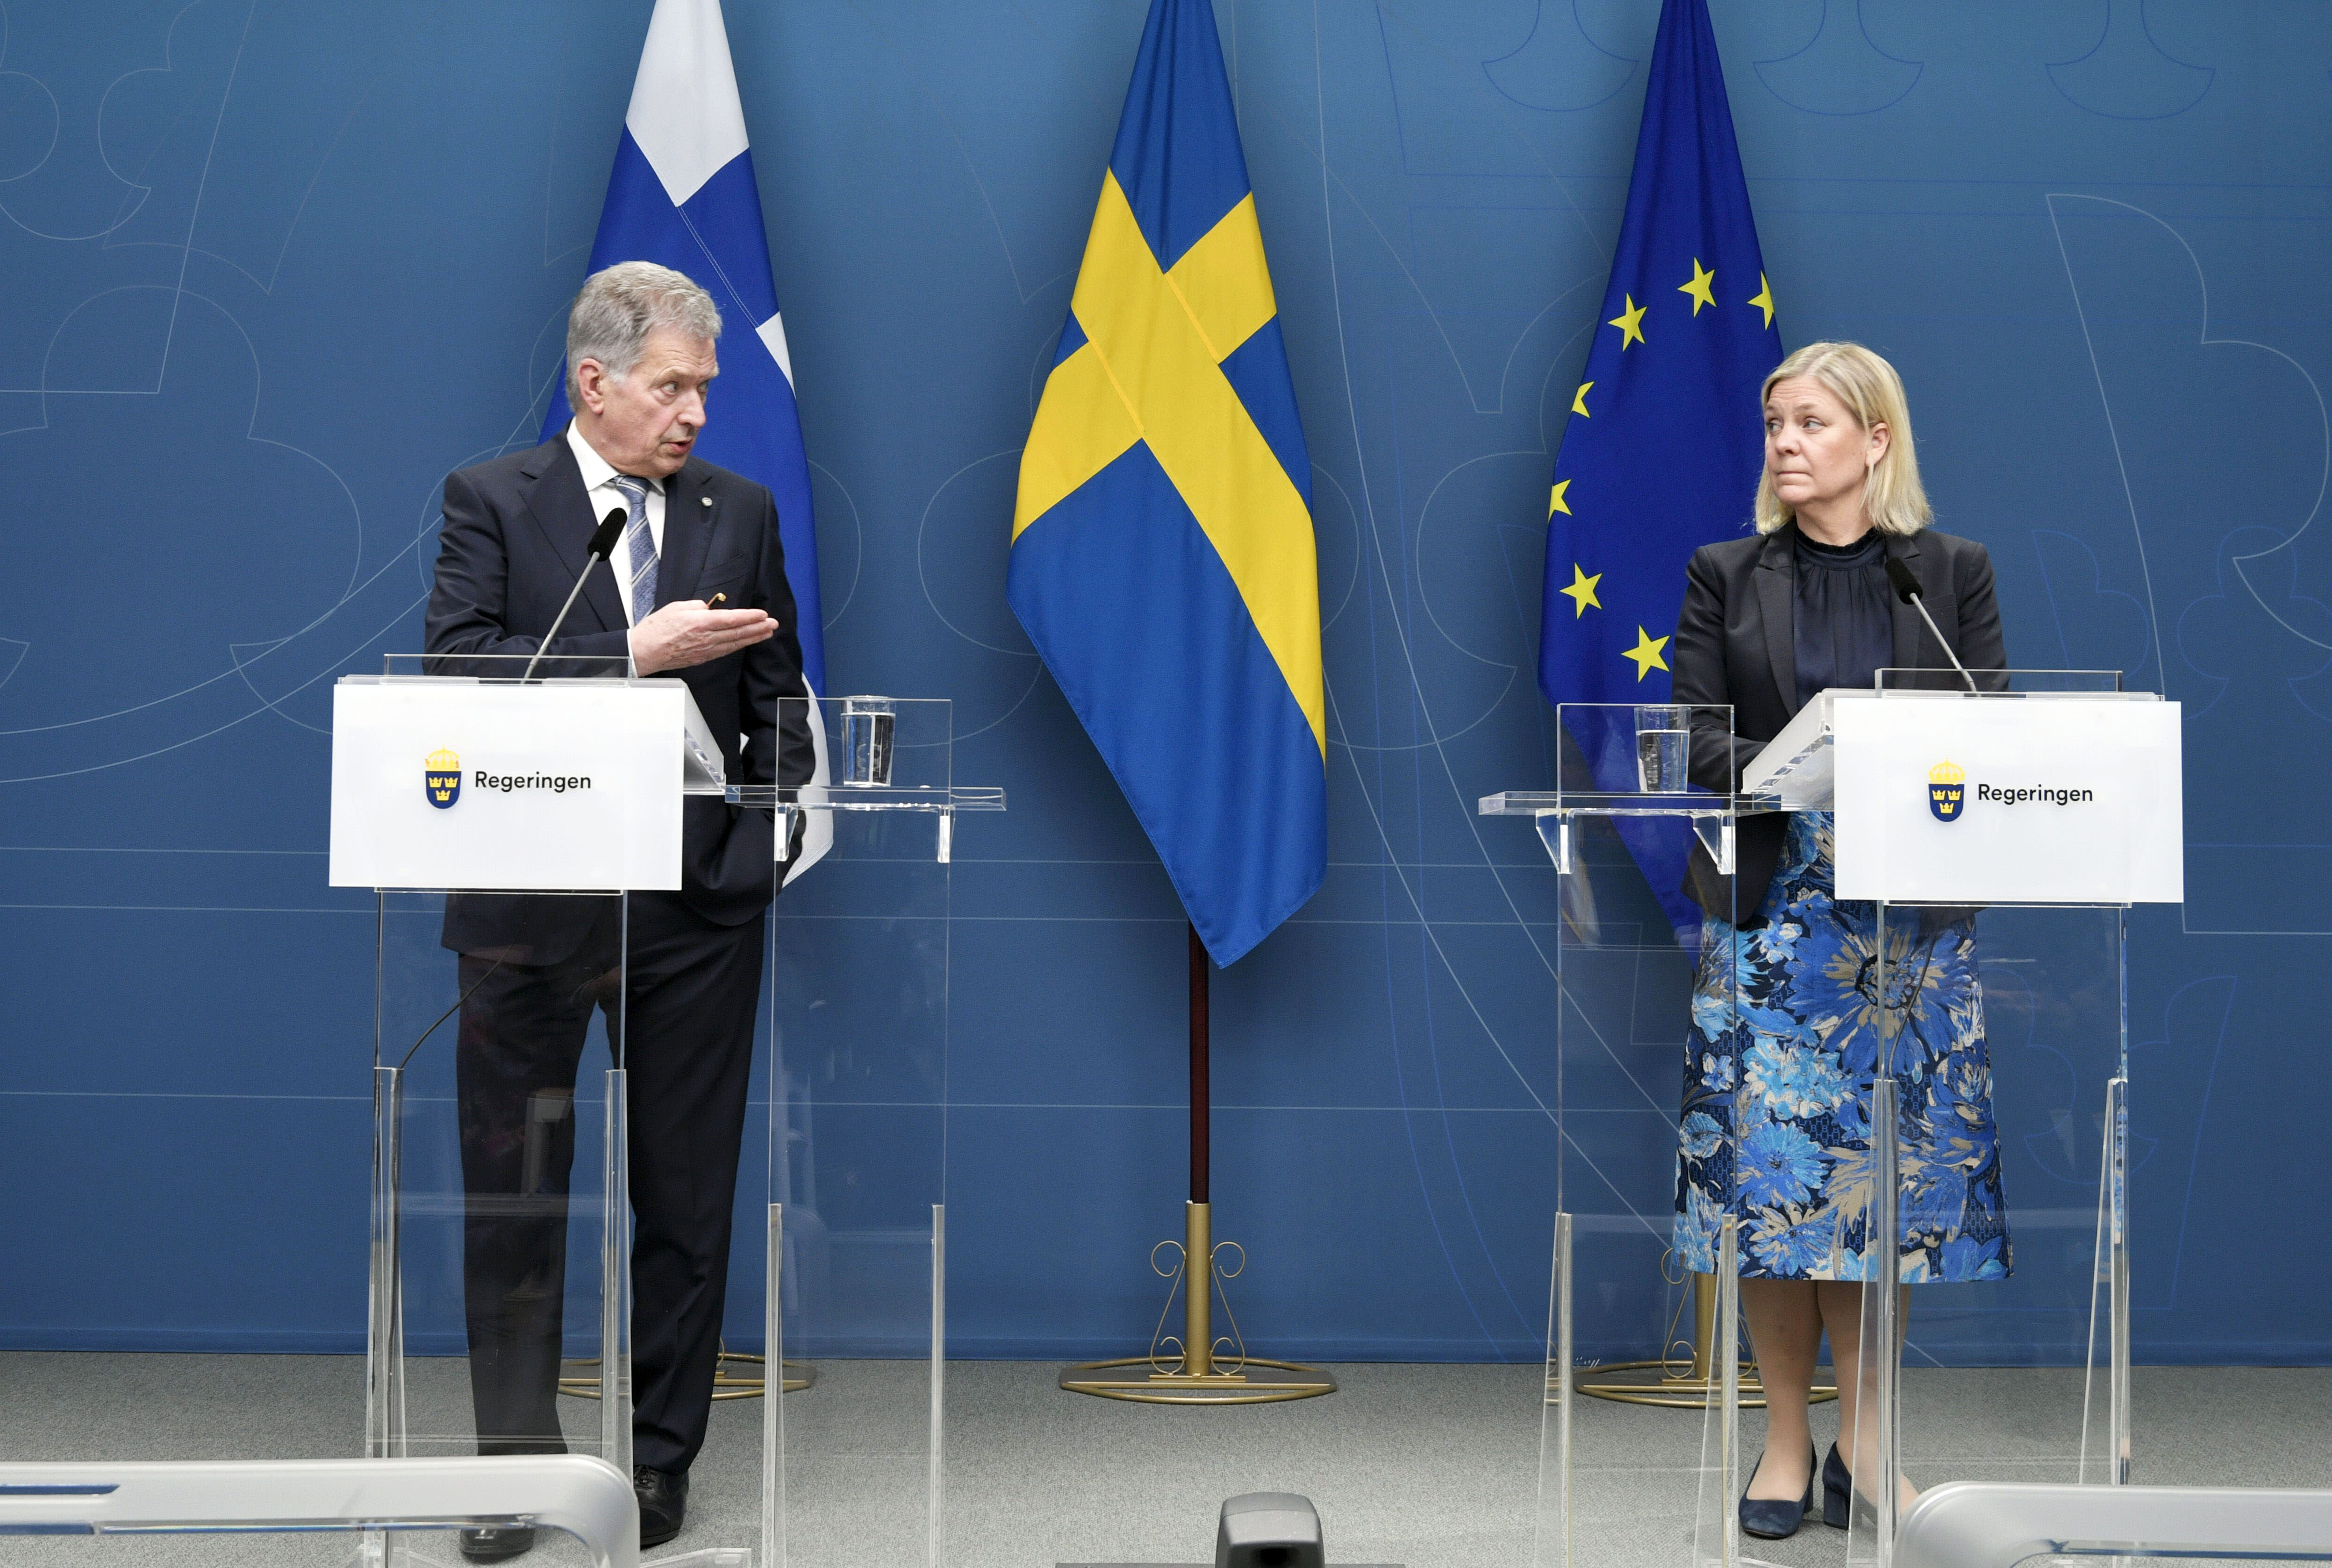 Finland and Sweden will apply for NATO membership together on Wednesday